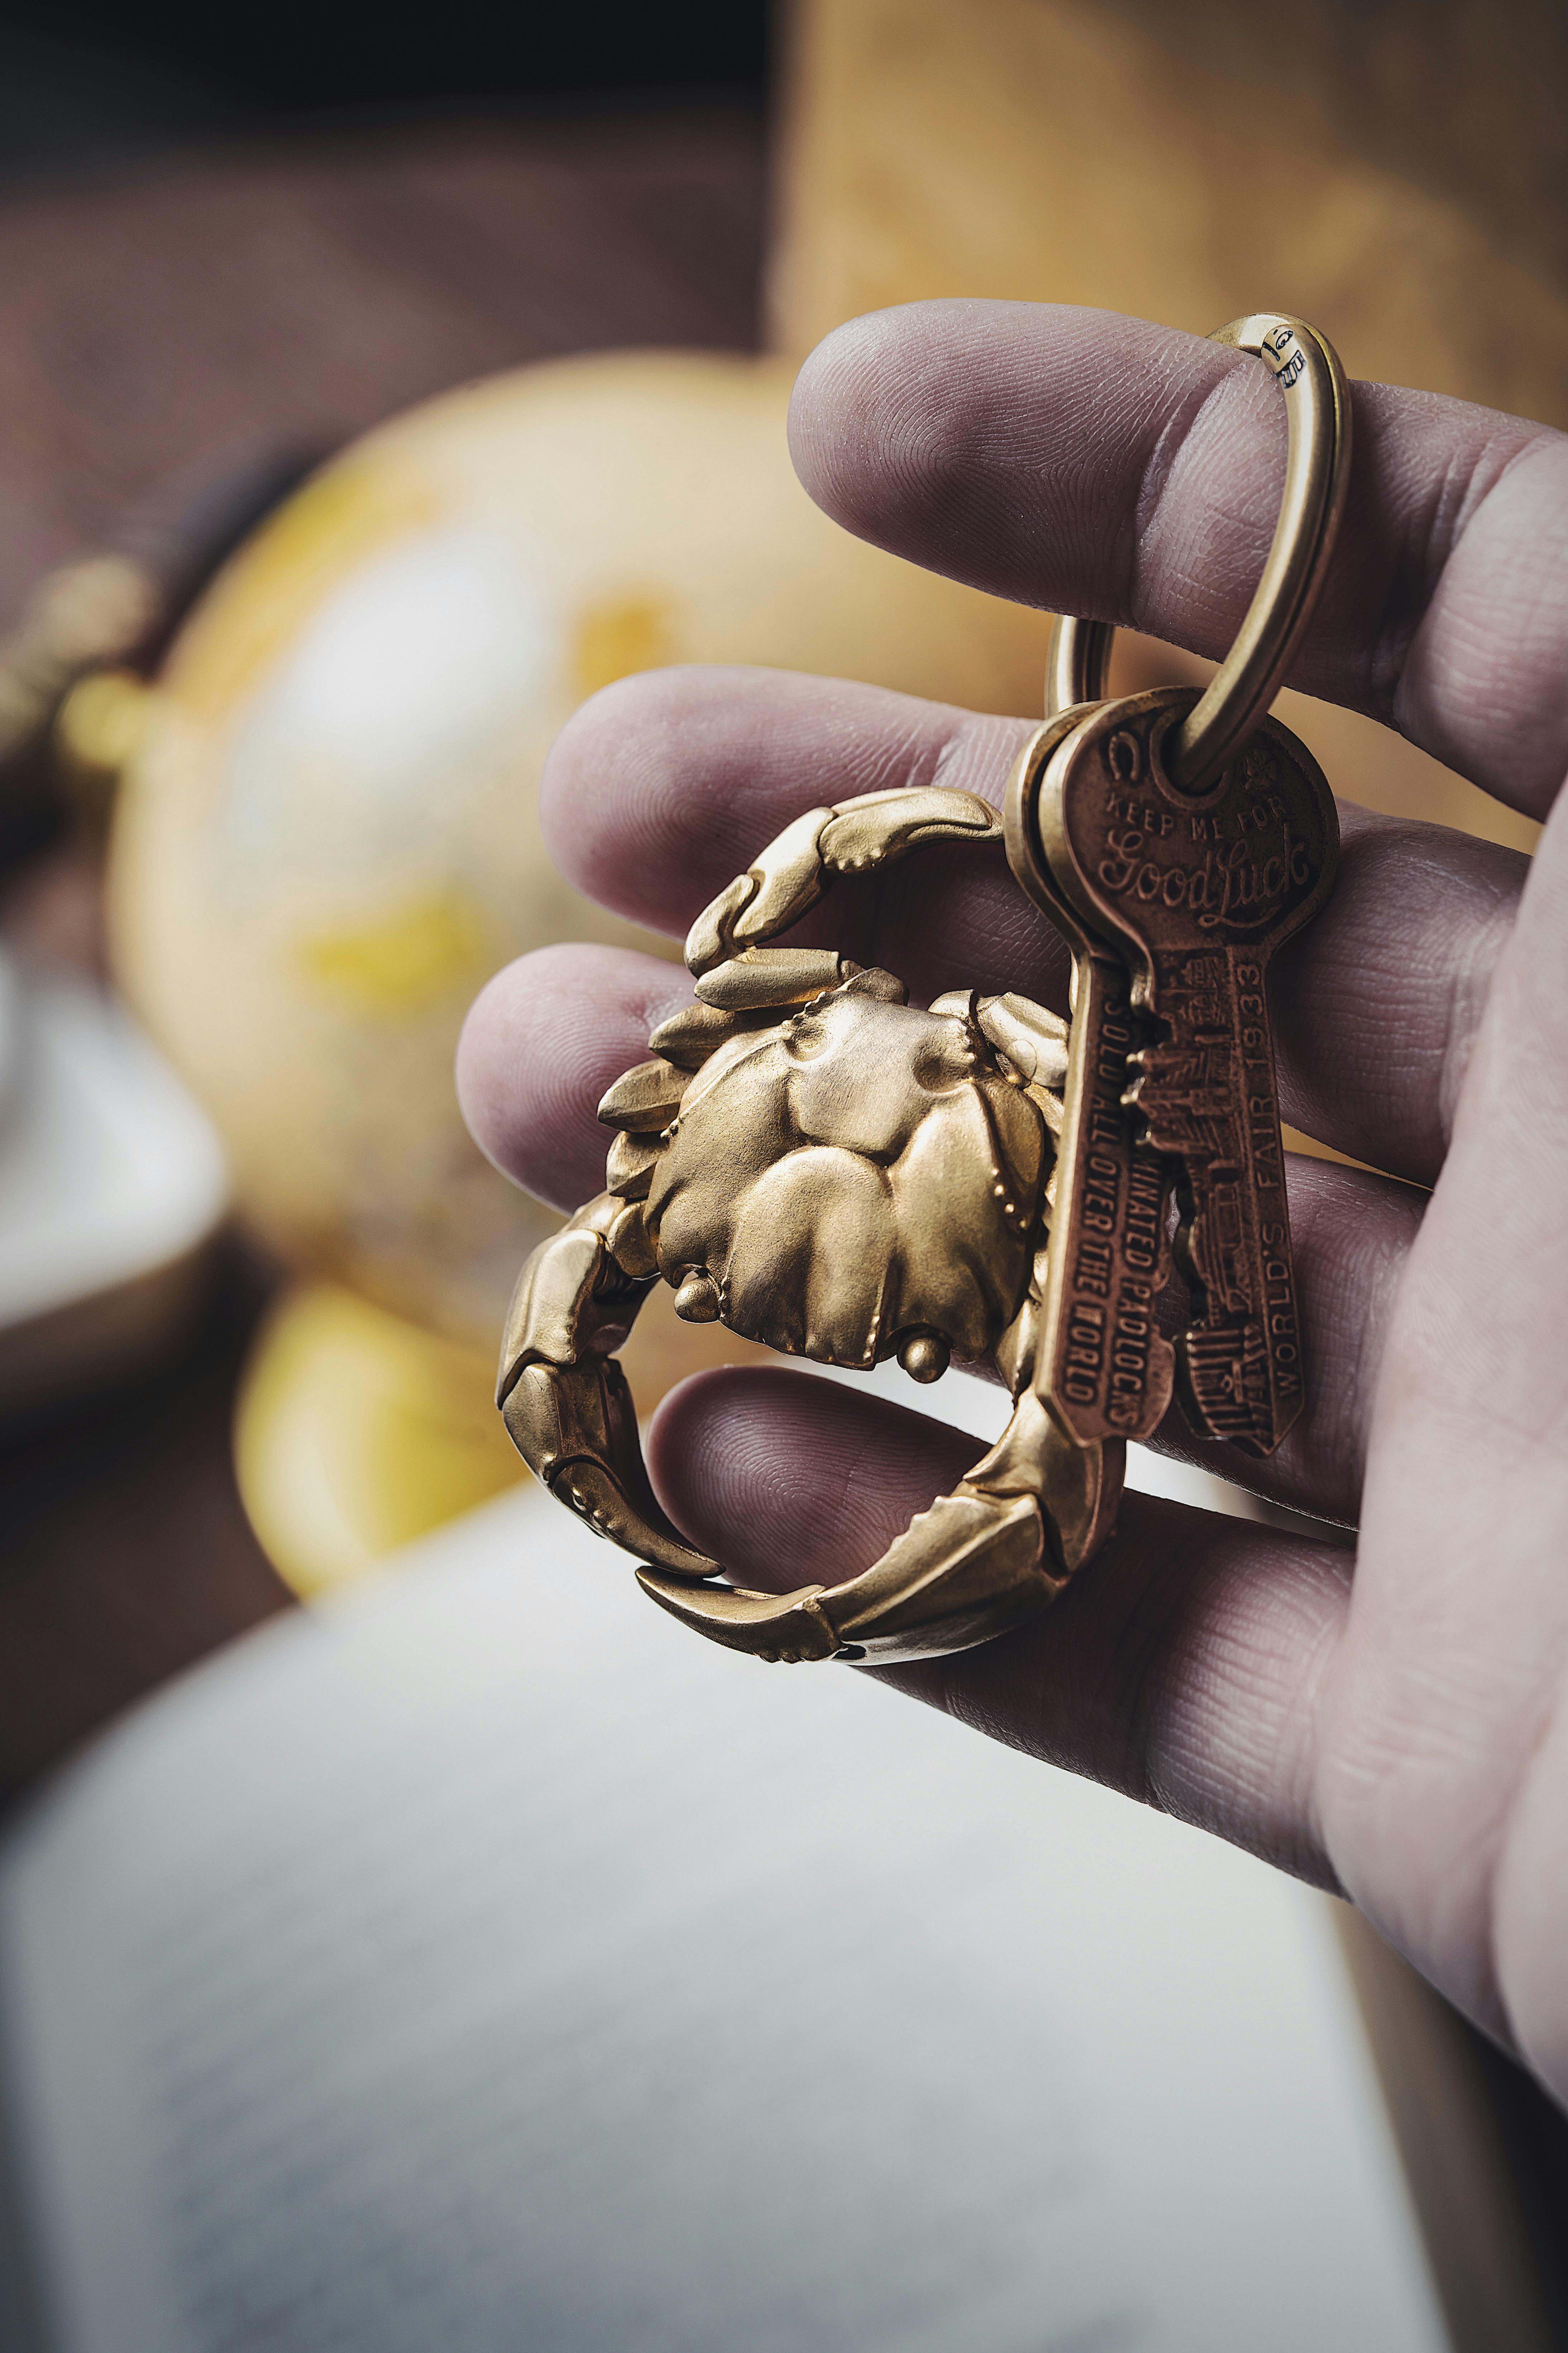 A hand bearing a bunch of keys | Source: Pexels